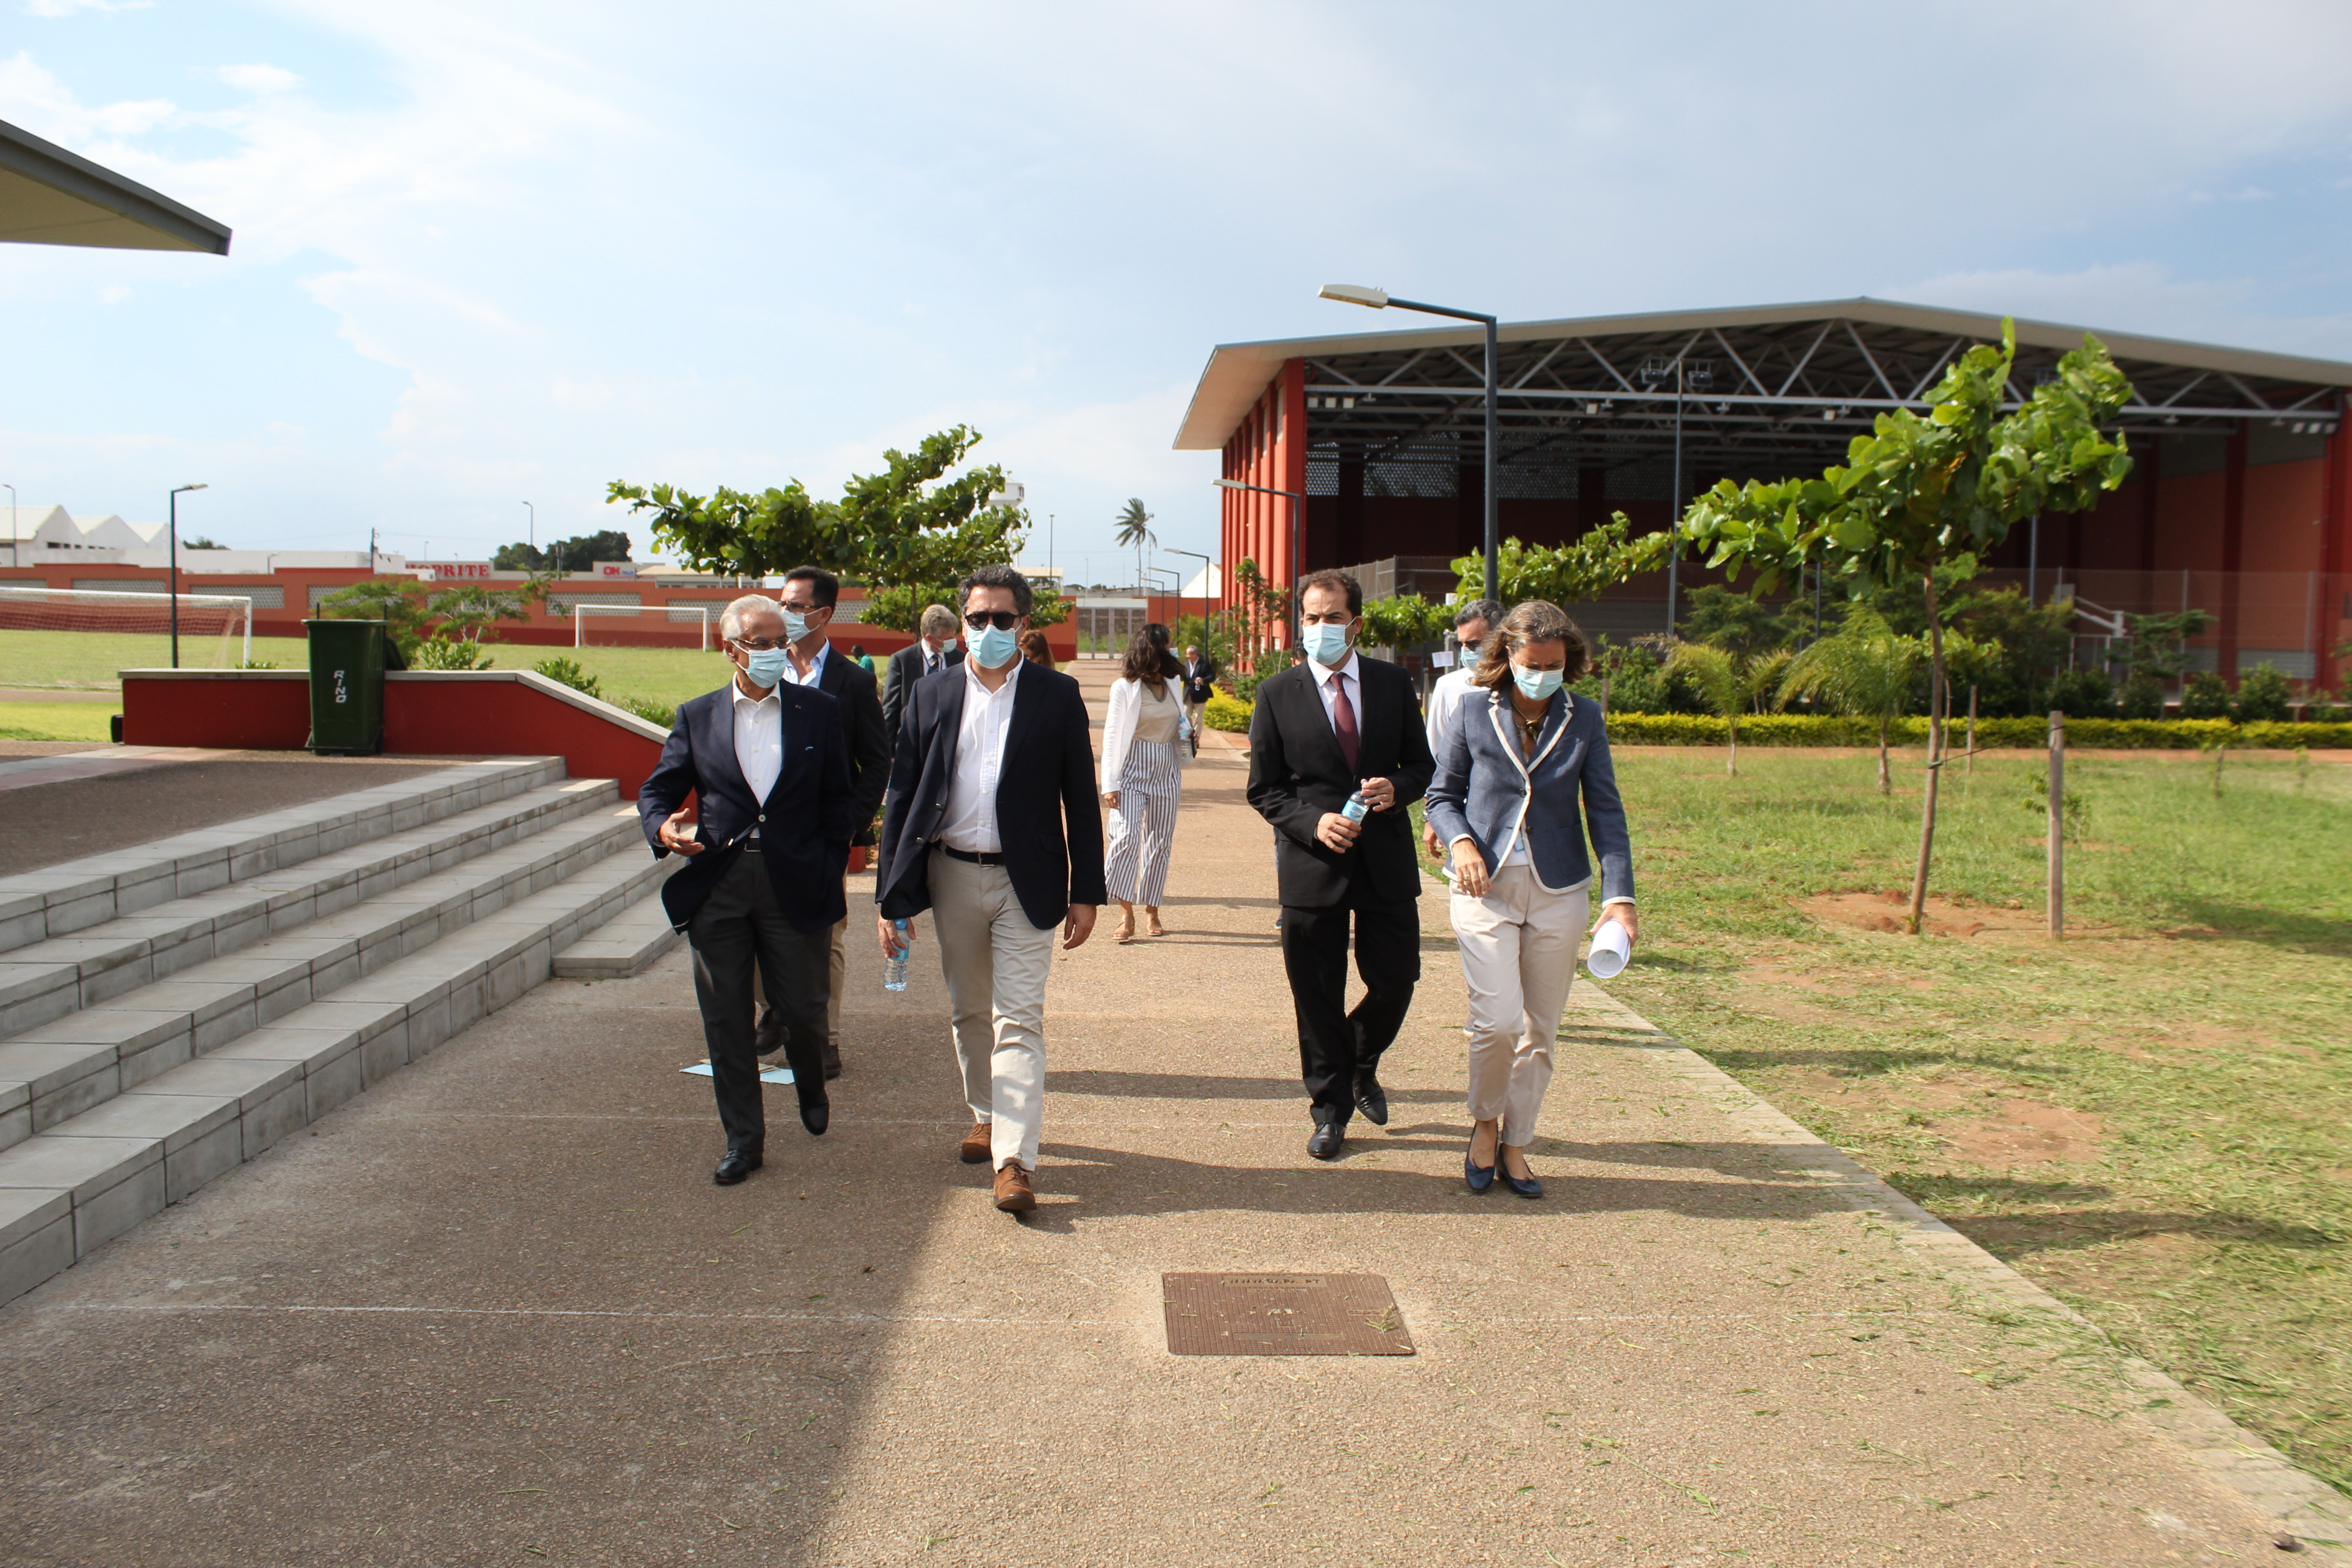 The delegation tours the campus, including the sports facilities shown here.